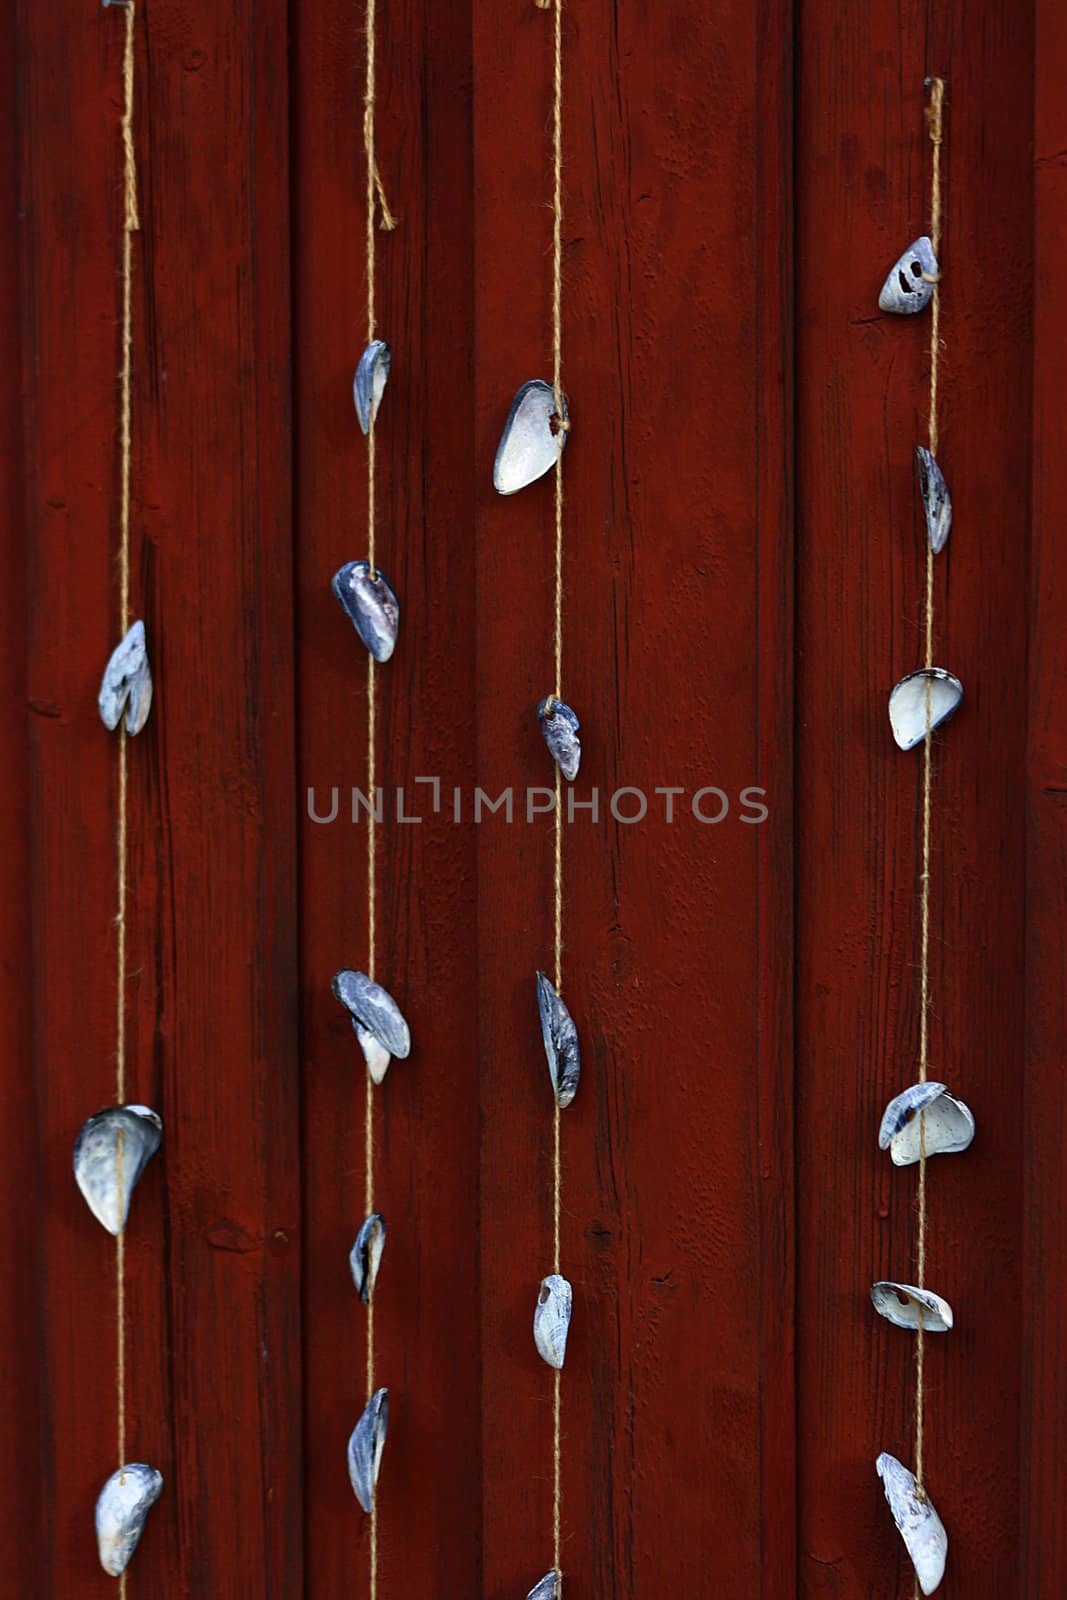 Mussels on a string by sundaune